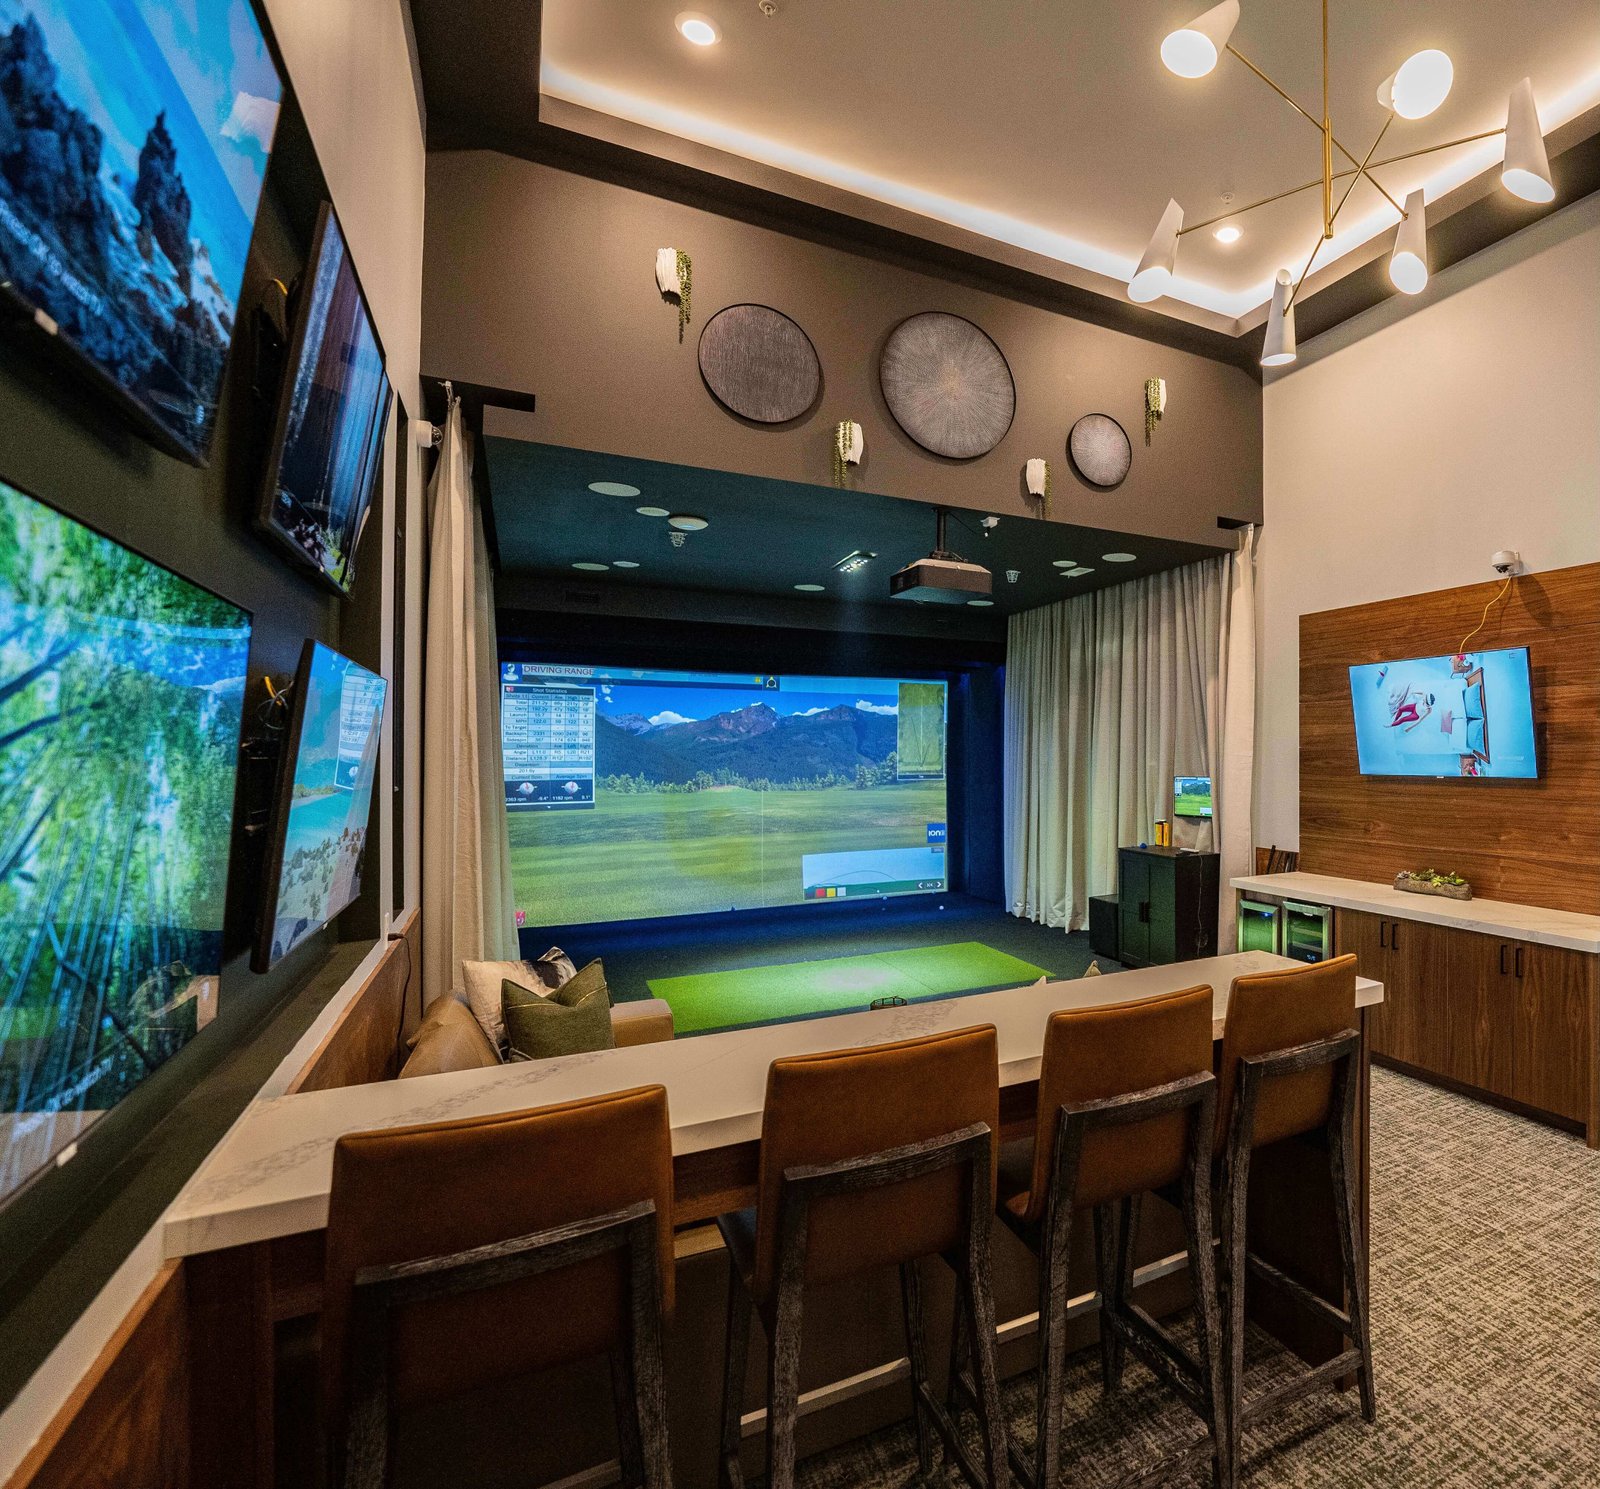 The Chelsea Golf Lounge